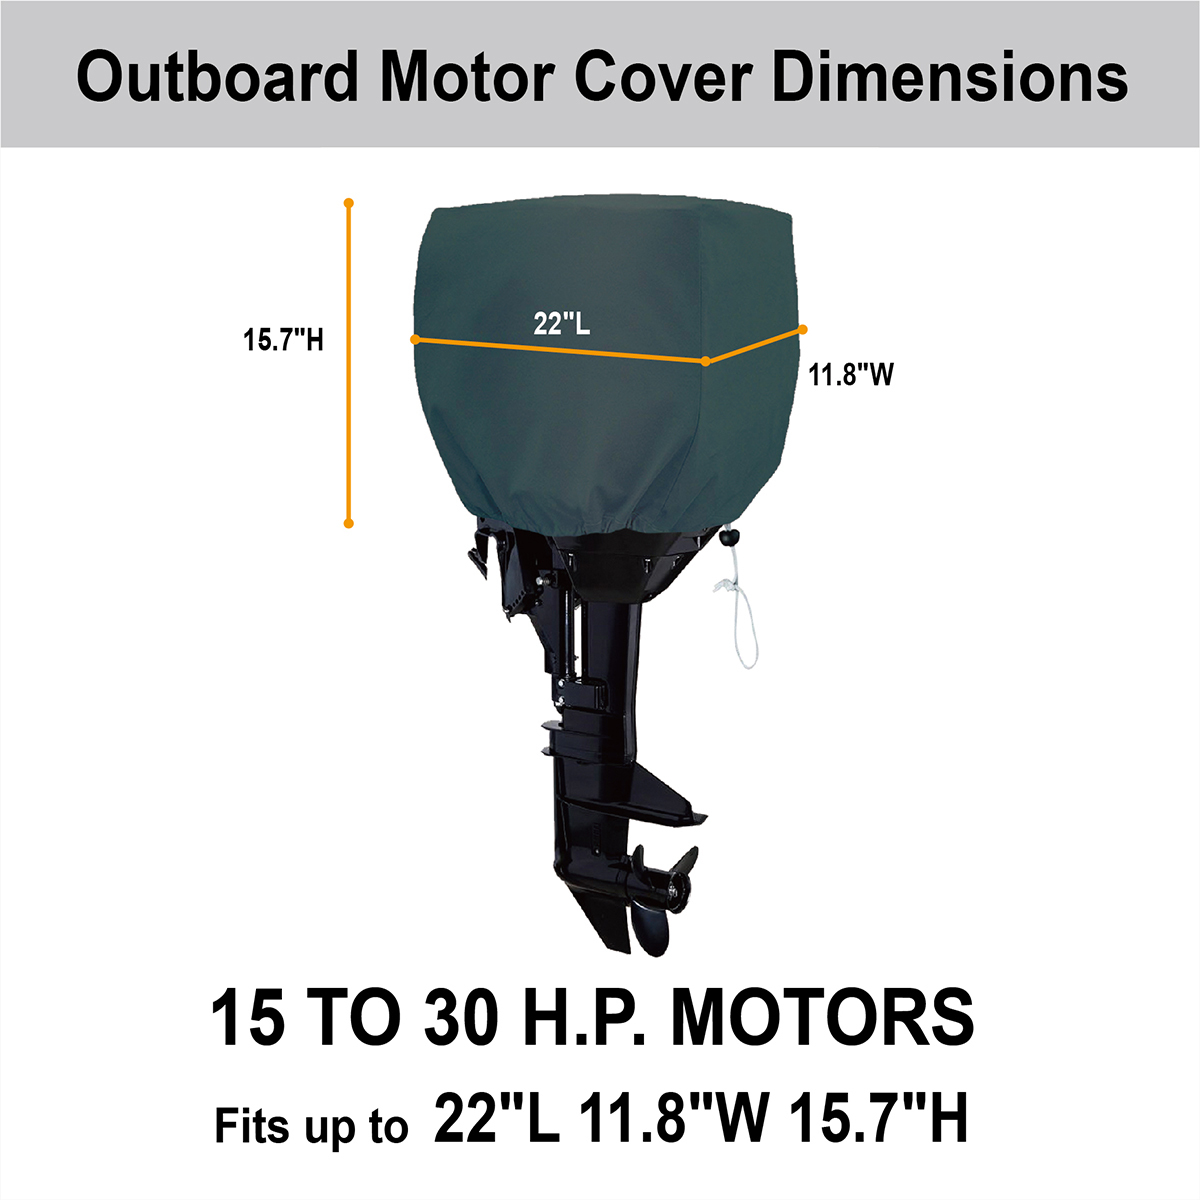 LEADALLWAY Outboard Motor Cover 210D Boat Engine Cover